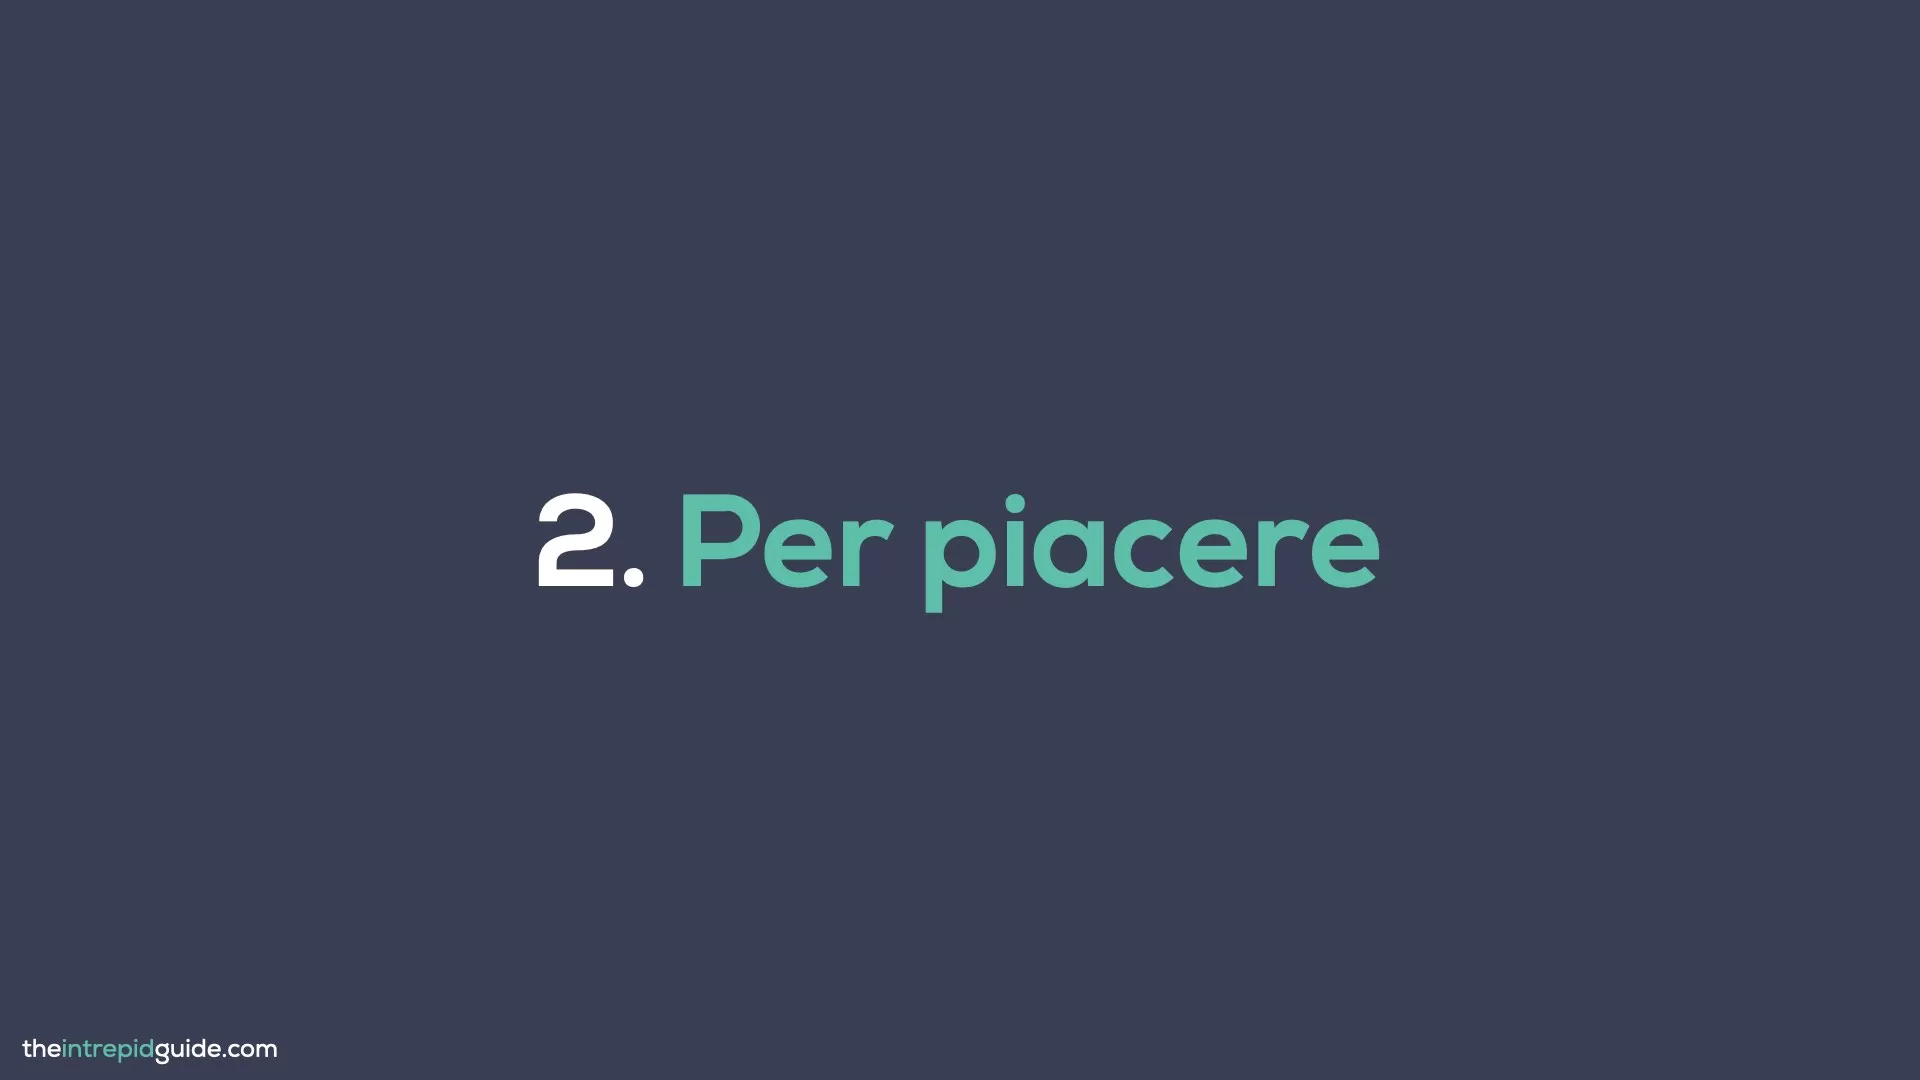 How to say Please in Italian - Per piacere